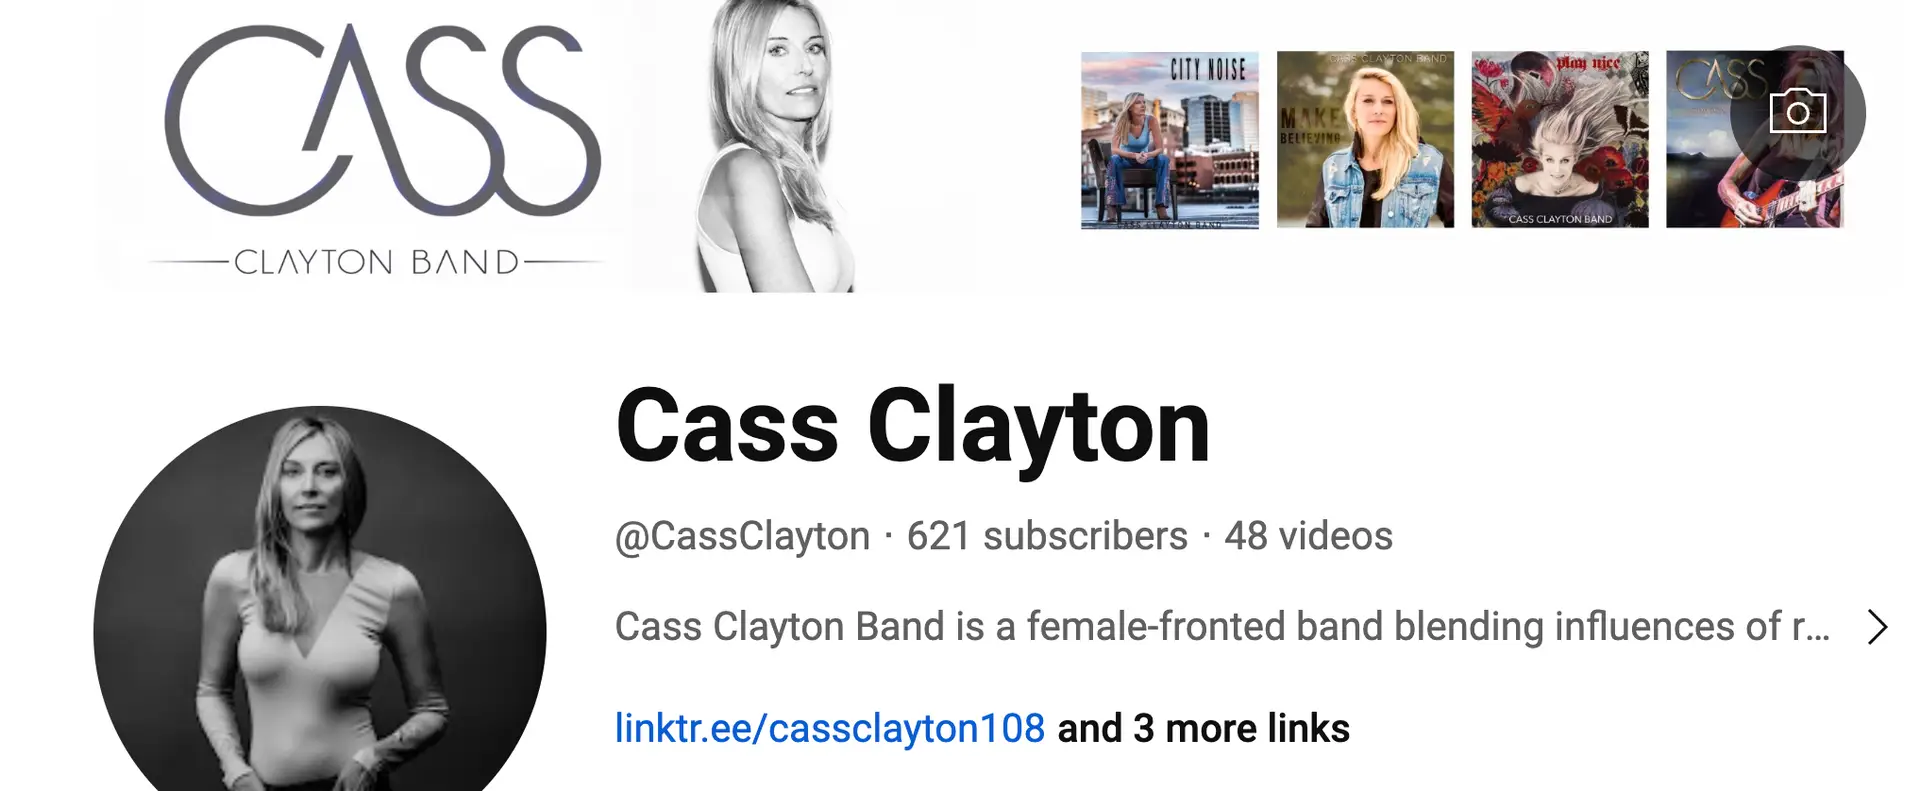 Cass Clayton YouTube channel landing page